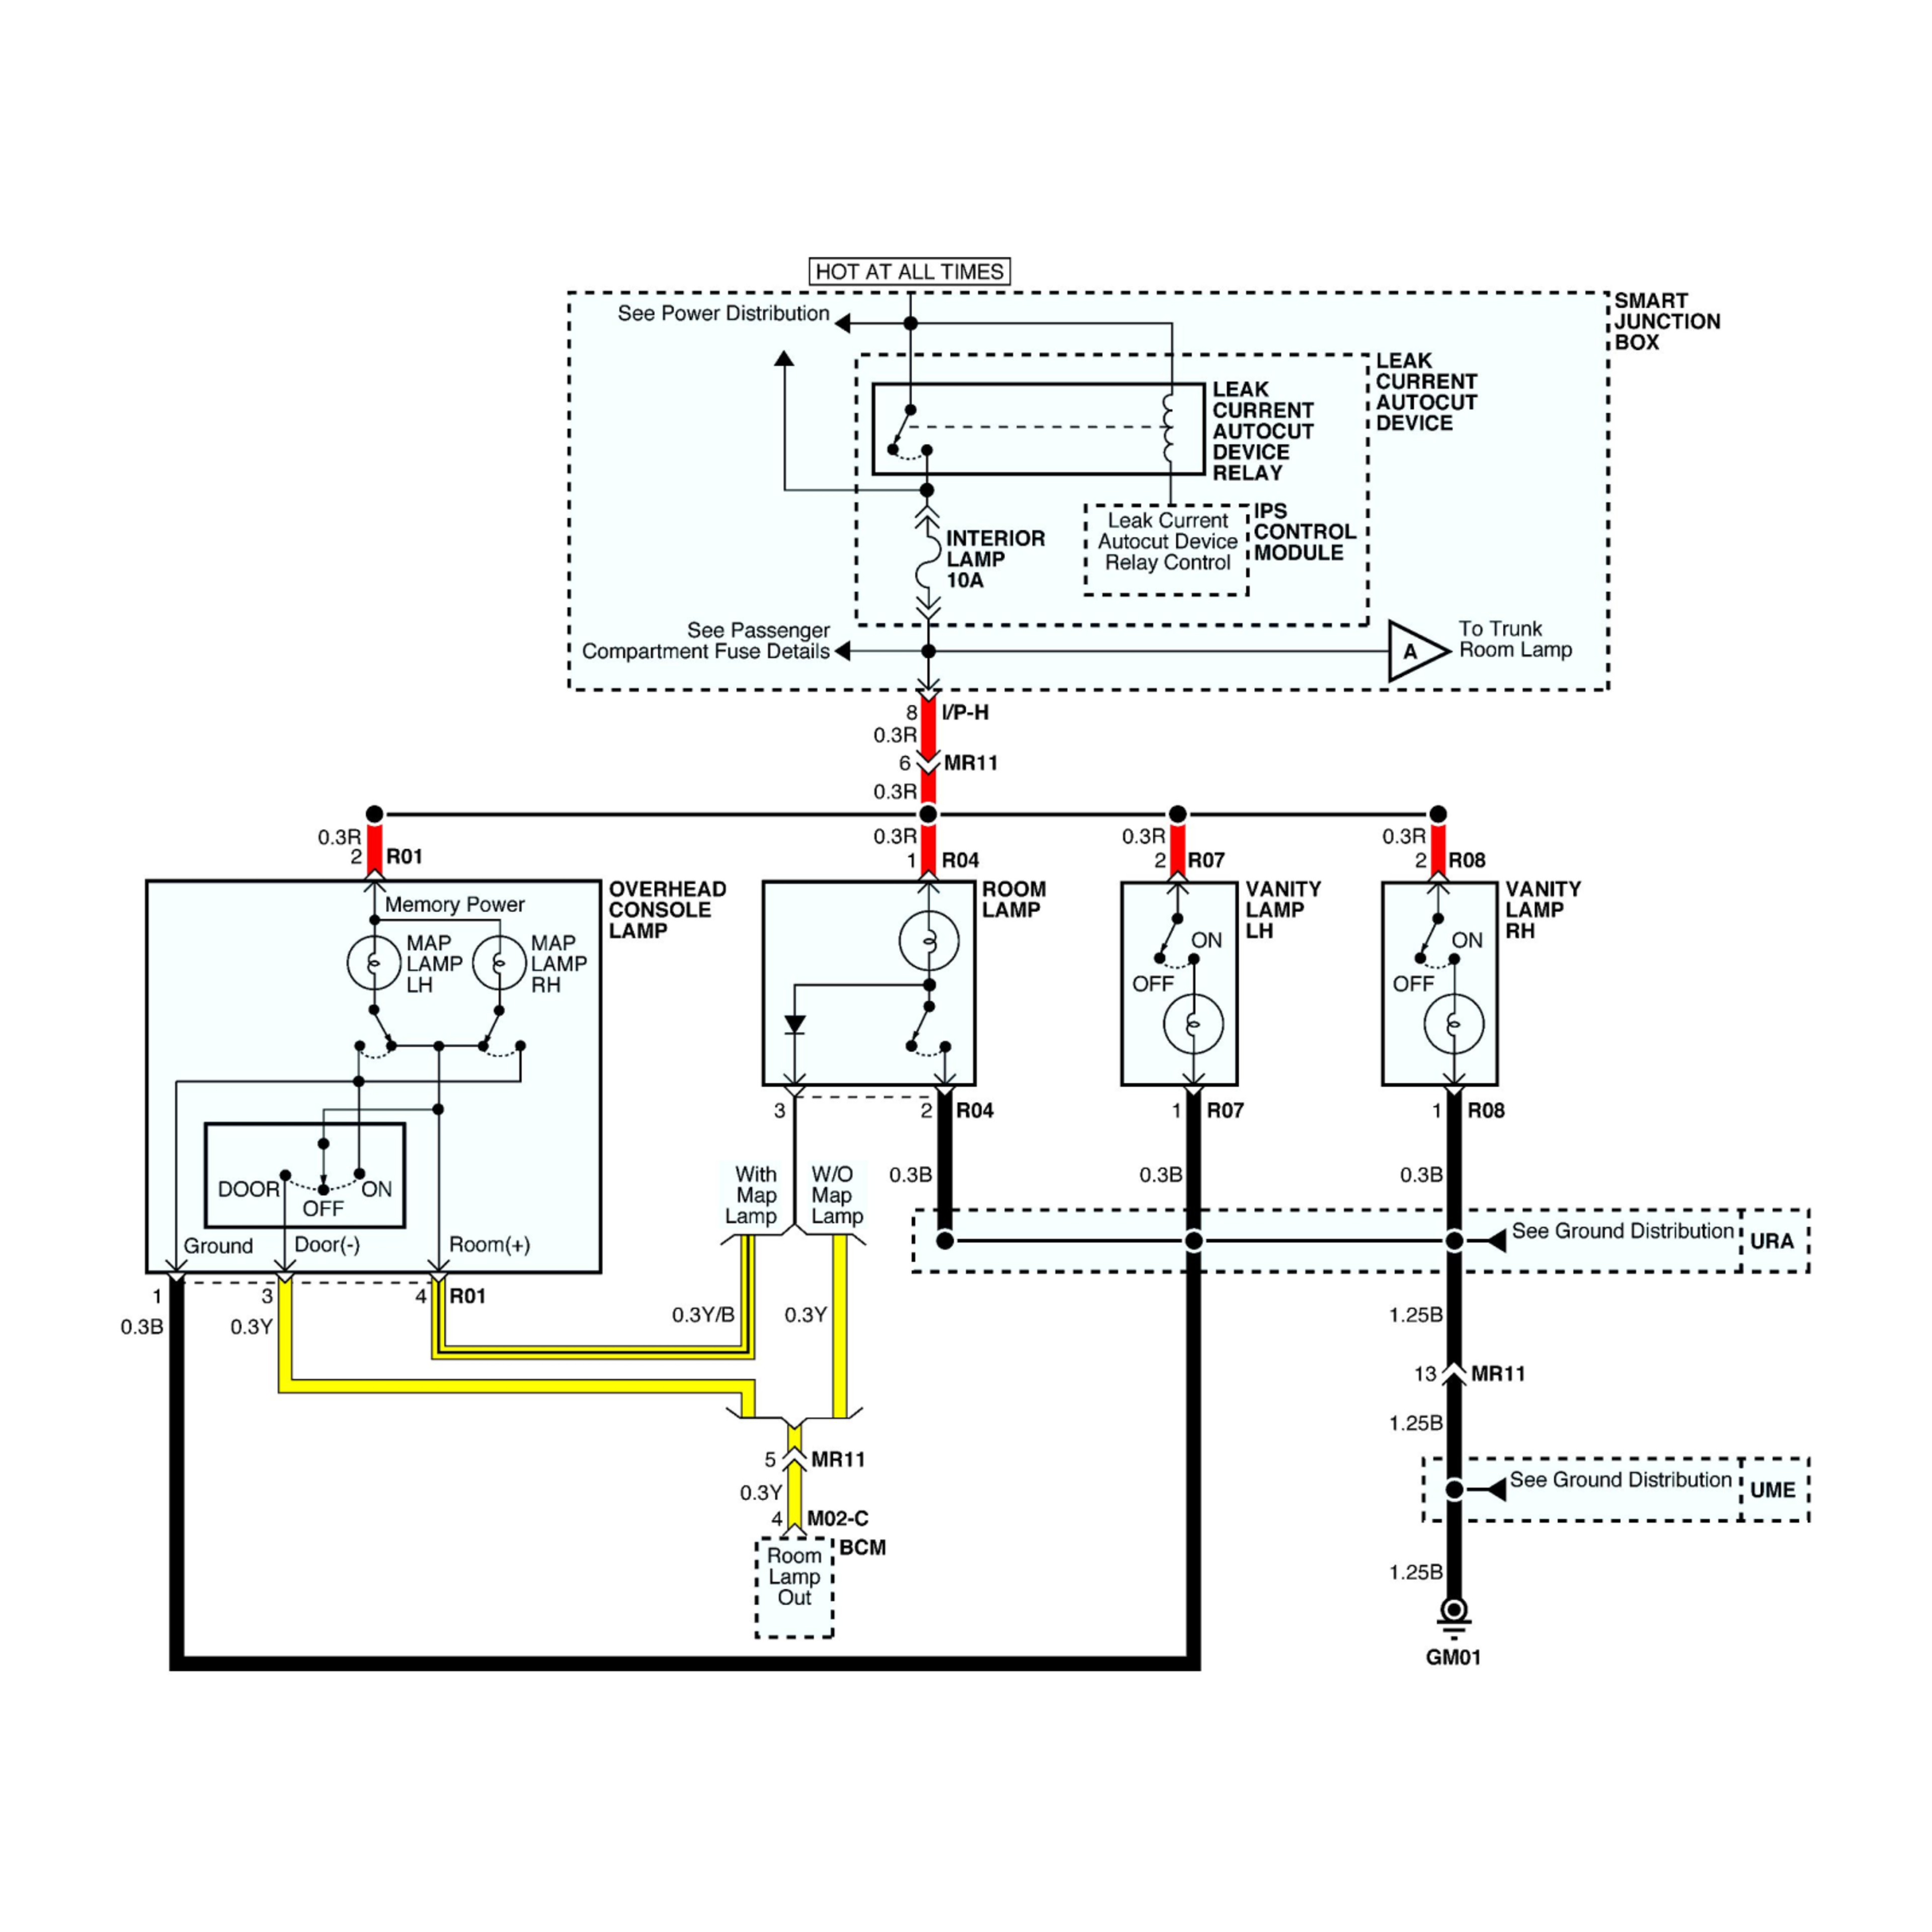 2011 Acura MDX wiring diagrams example